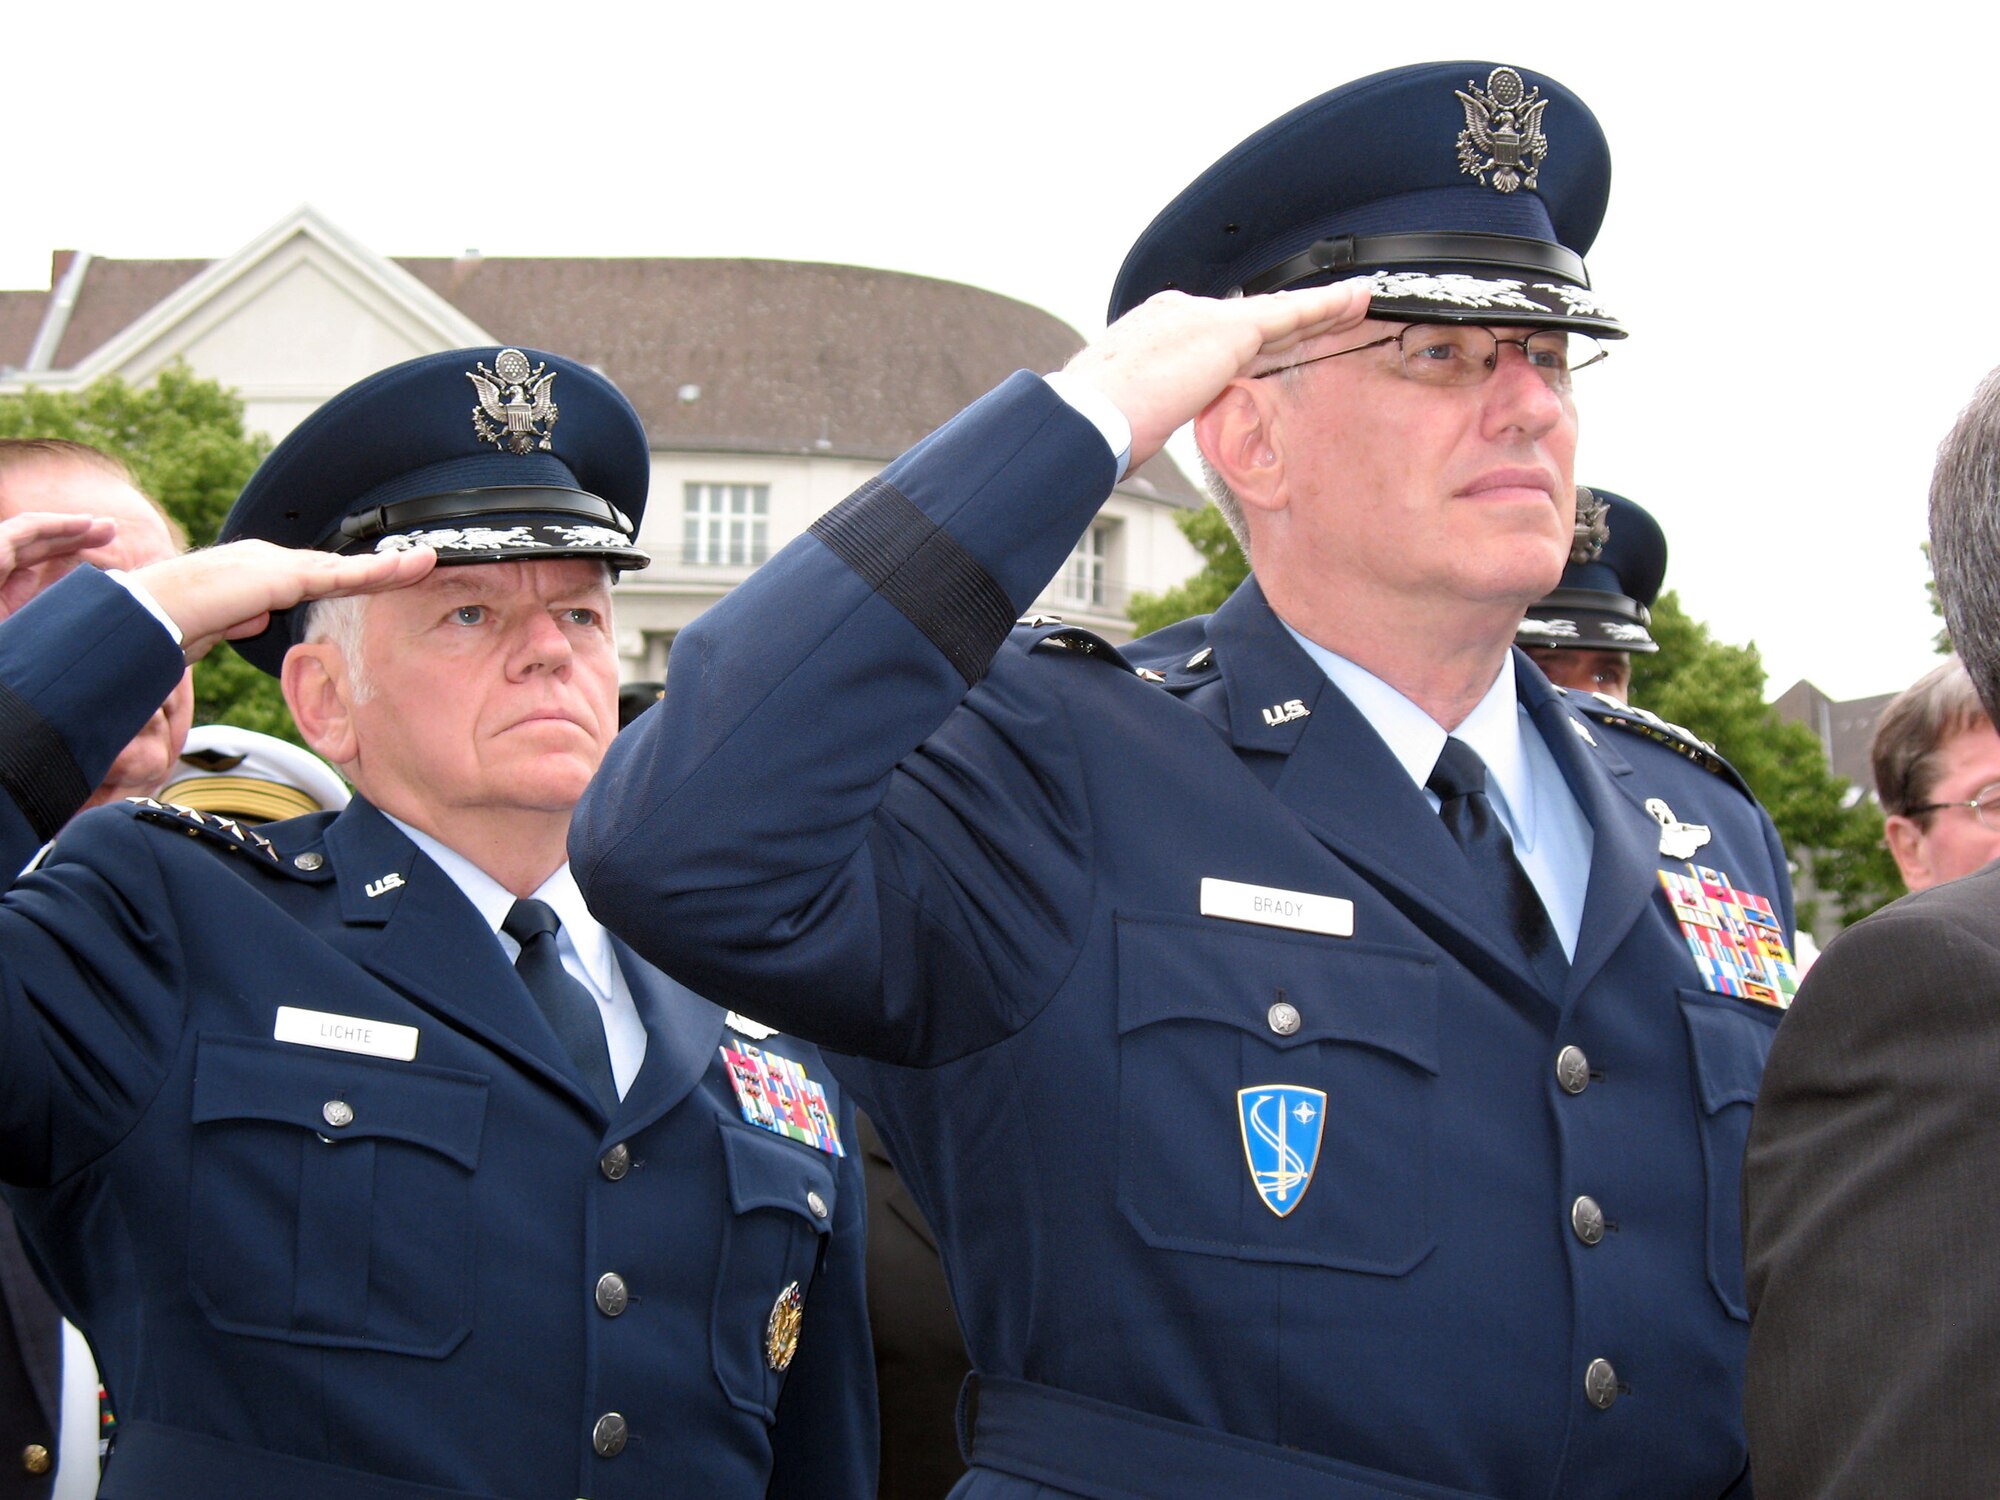 Gen. Arthur J. Lichte and Gen. Roger A. Brady salute during the playing of national anthems of the allied nations involved with the Berlin airlift June 27 in Berlin. The ceremony honored the 78 fallen airmen who lost their lives during the Berlin Airlift. General Lichte is the commander of Air Mobililty Command, and General Brady is the U.S. Air Forces in Europe commander. (U.S. Air Force photo/Master Sgt. Ron Przysucha)